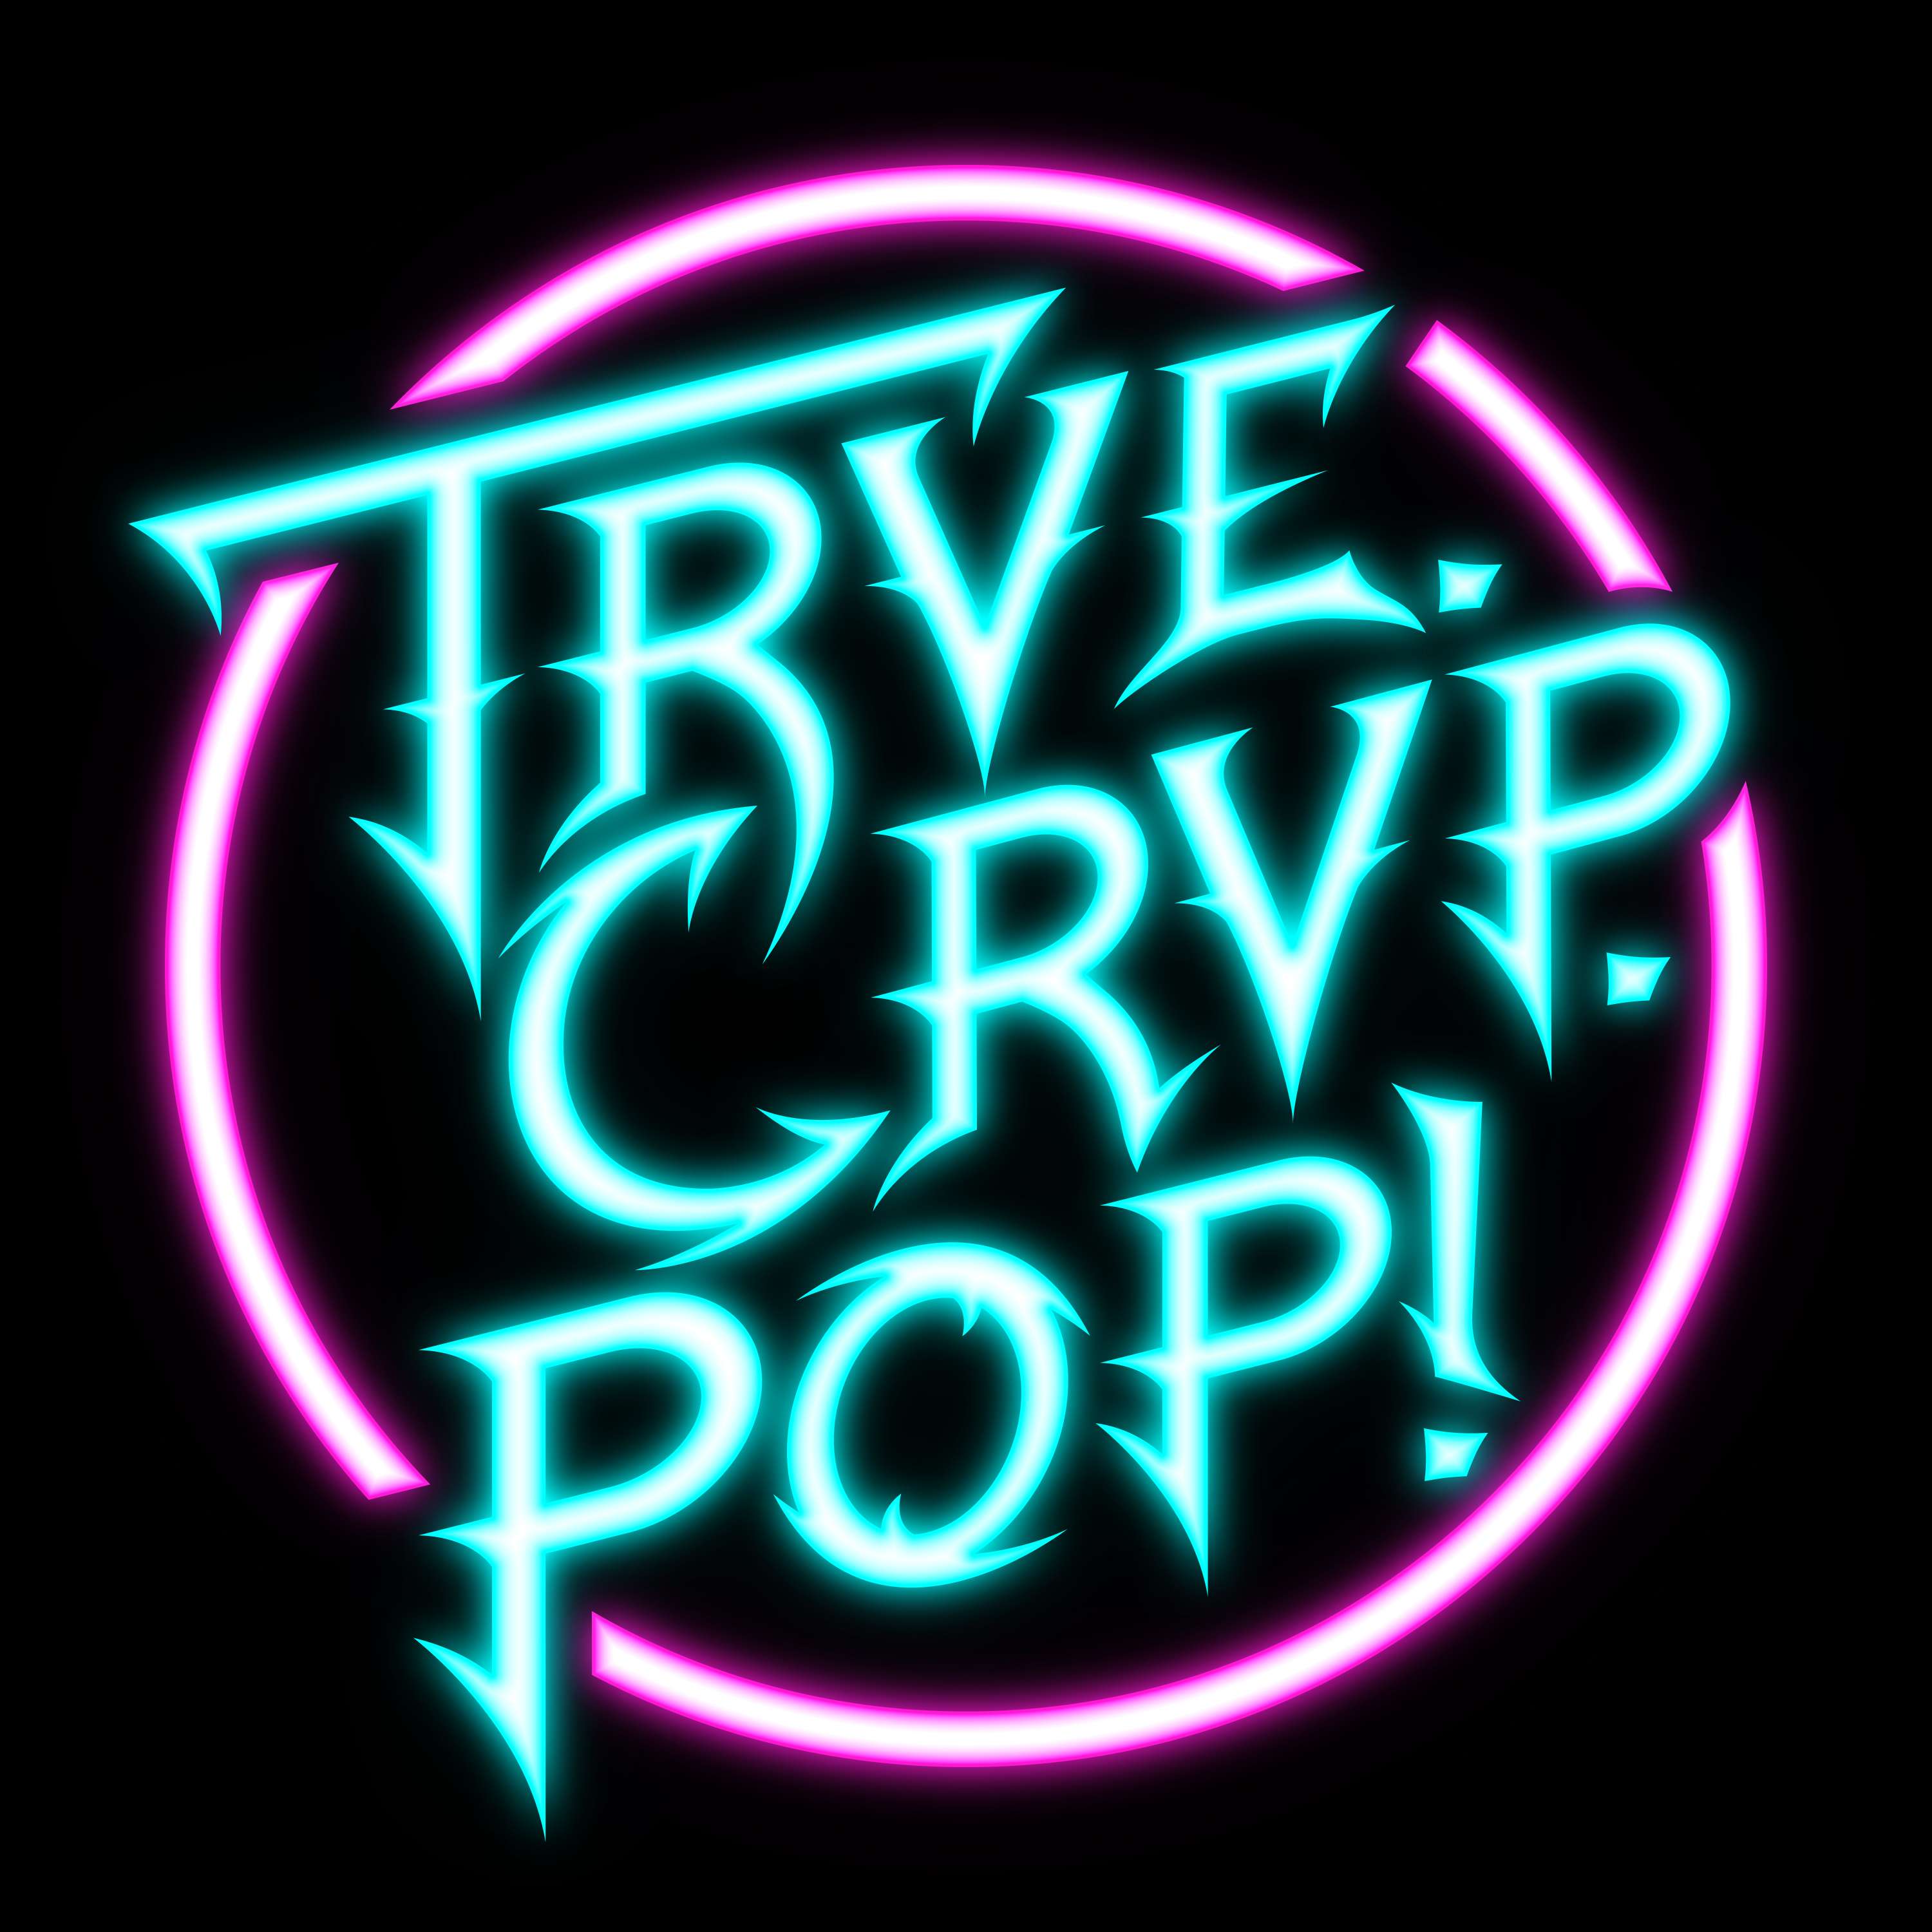 Our Christmas Gift to You, Trve. Crvp. Pop!: Cliff Richard - Cliff at Christmas